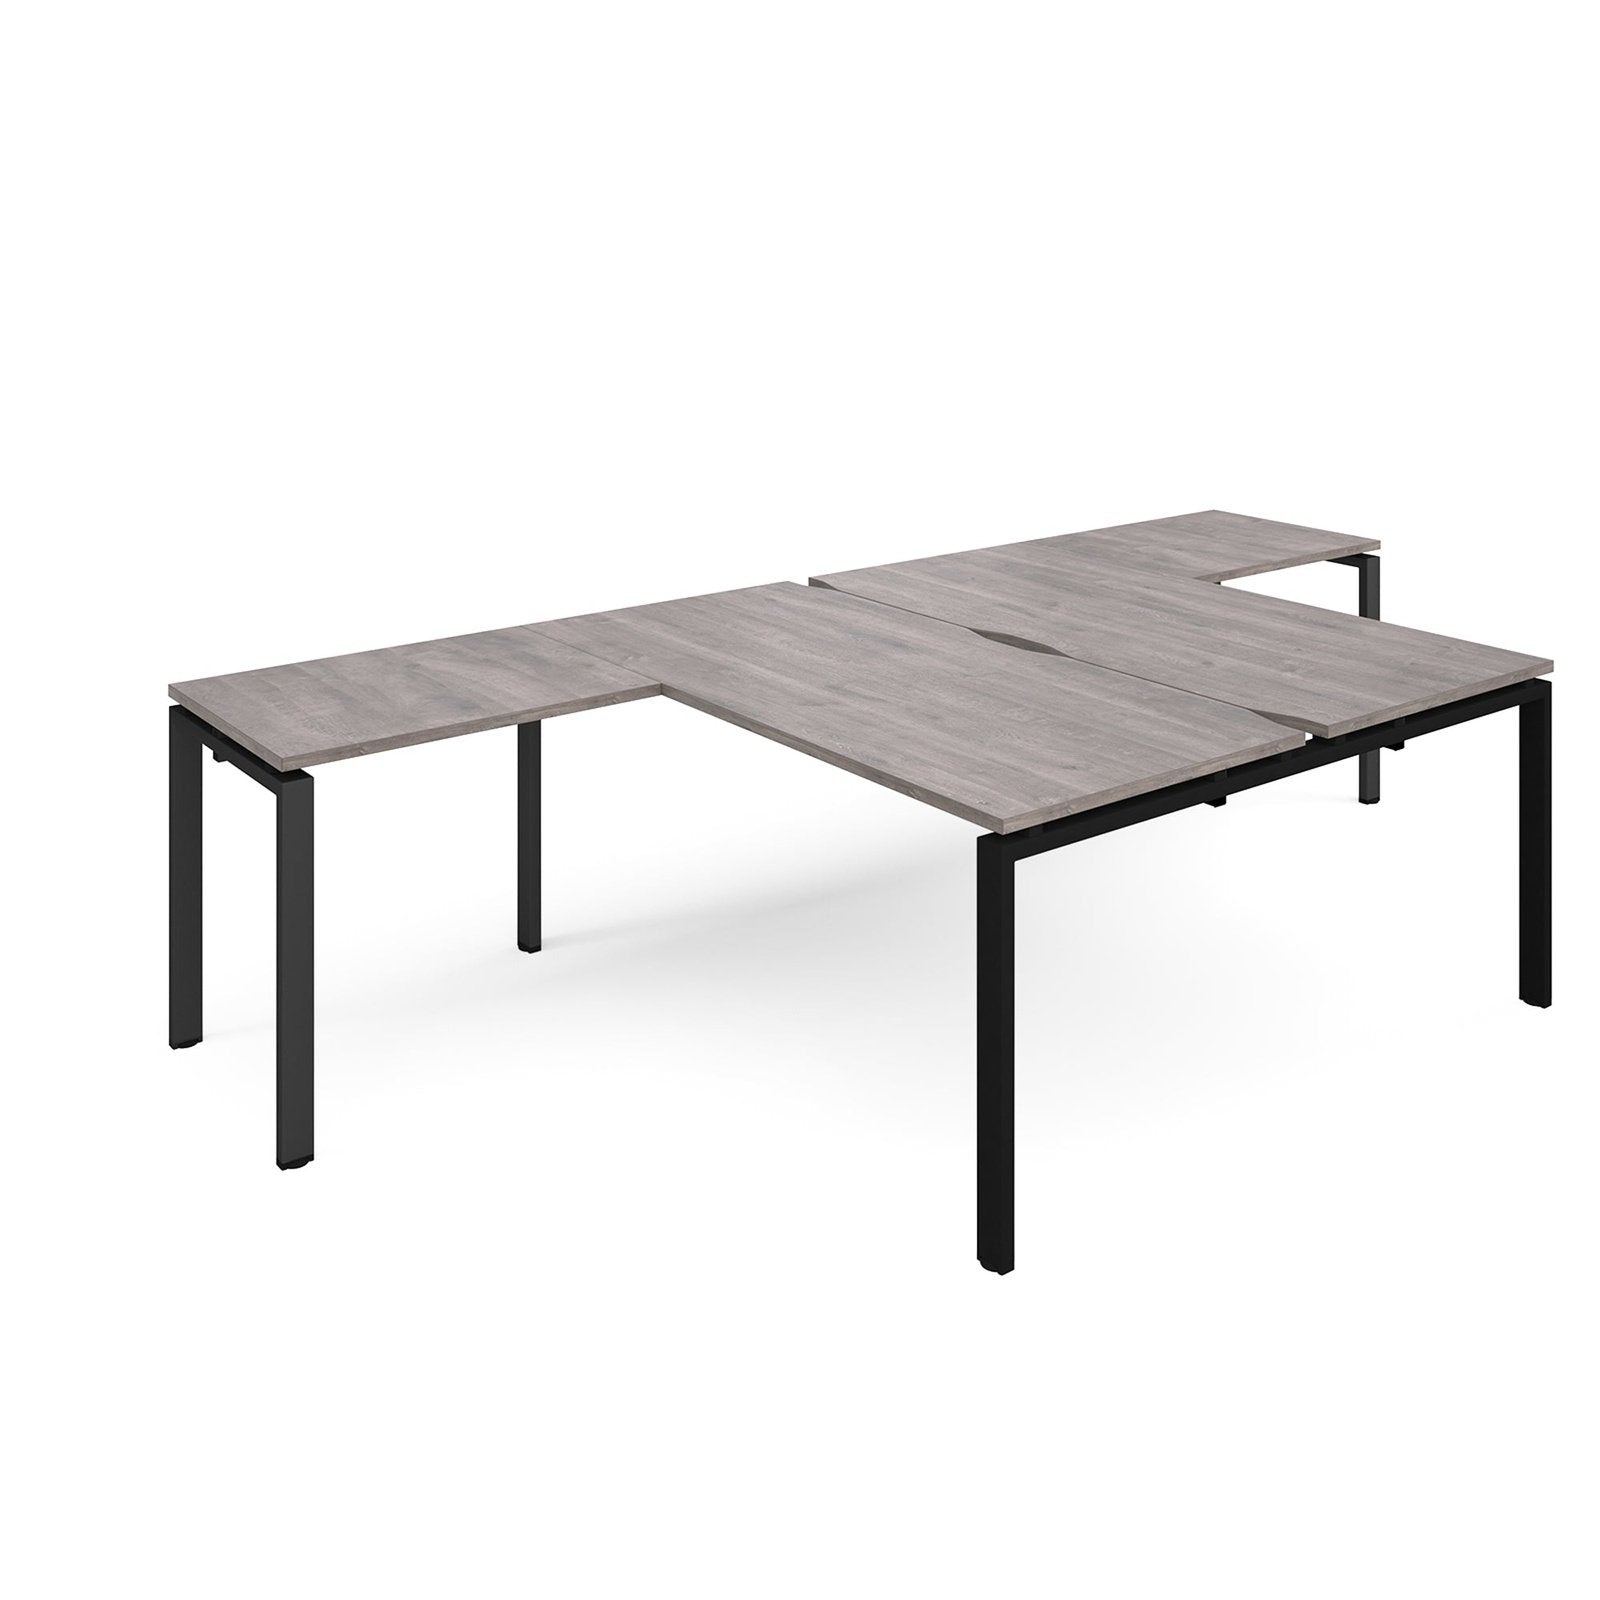 Adapt to back 1600 deep with 800mm return desks - Office Products Online